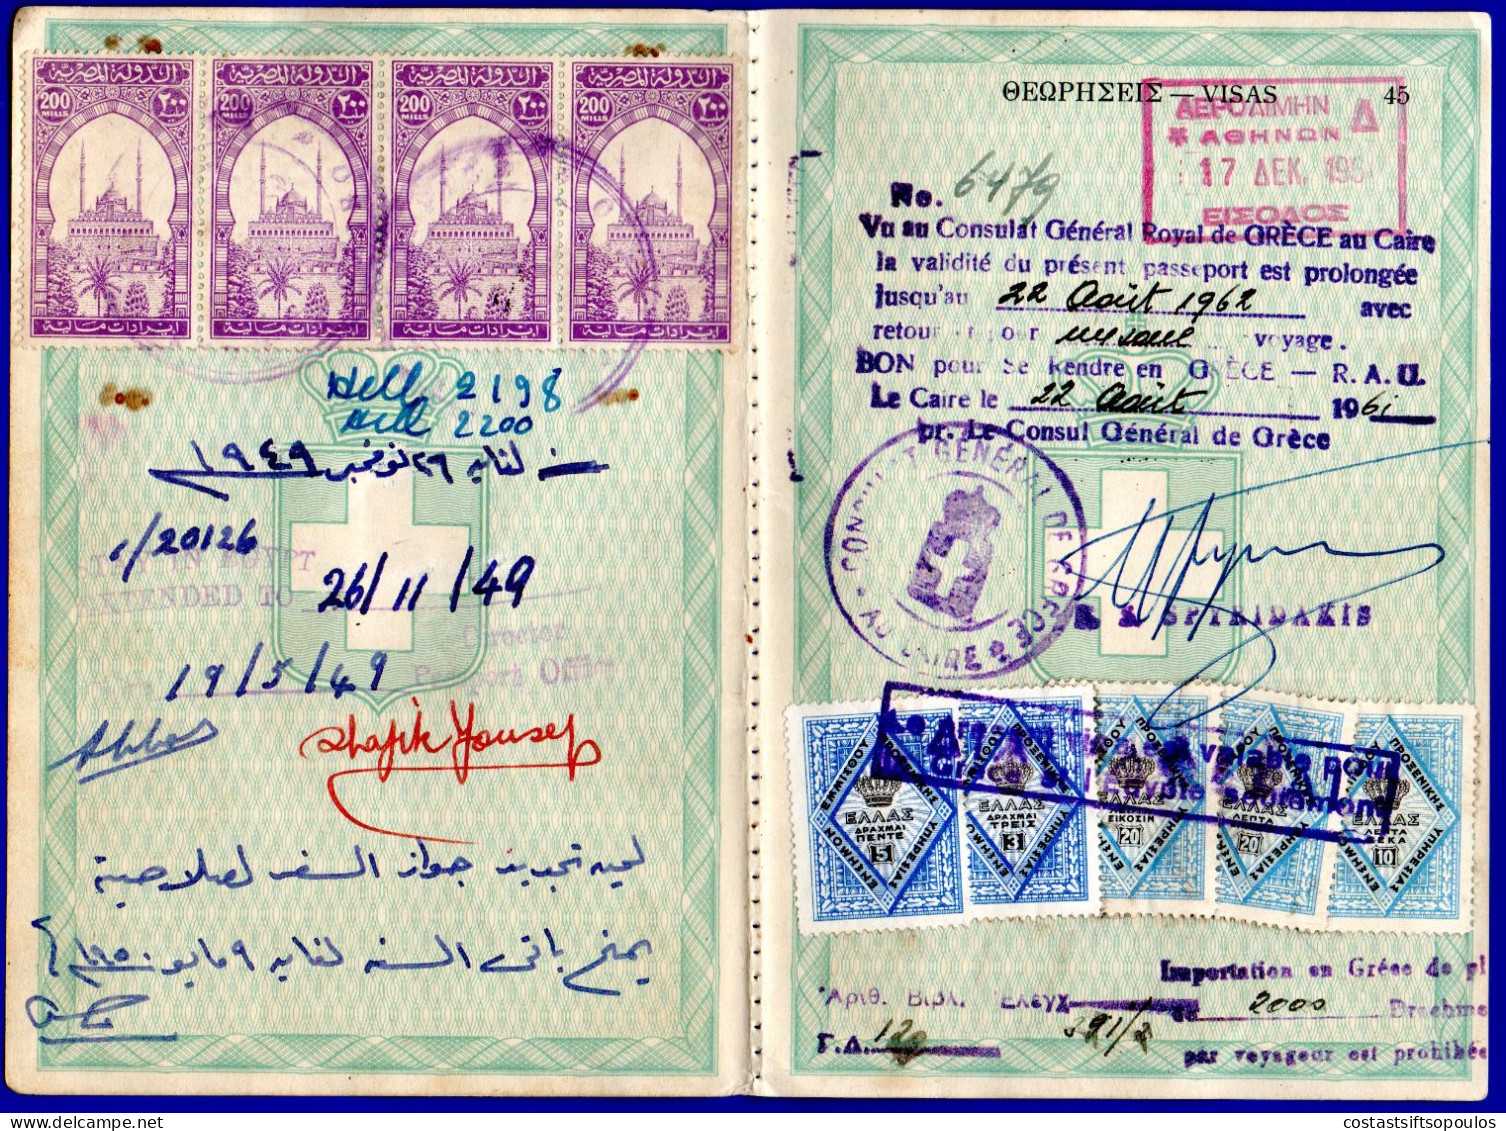 3000. GREECE-EGYPT 8 PAGES FROM OLD TRAVEL DOCUMENT WITH 12 REVENUES,4 SCANS - Fiscale Zegels